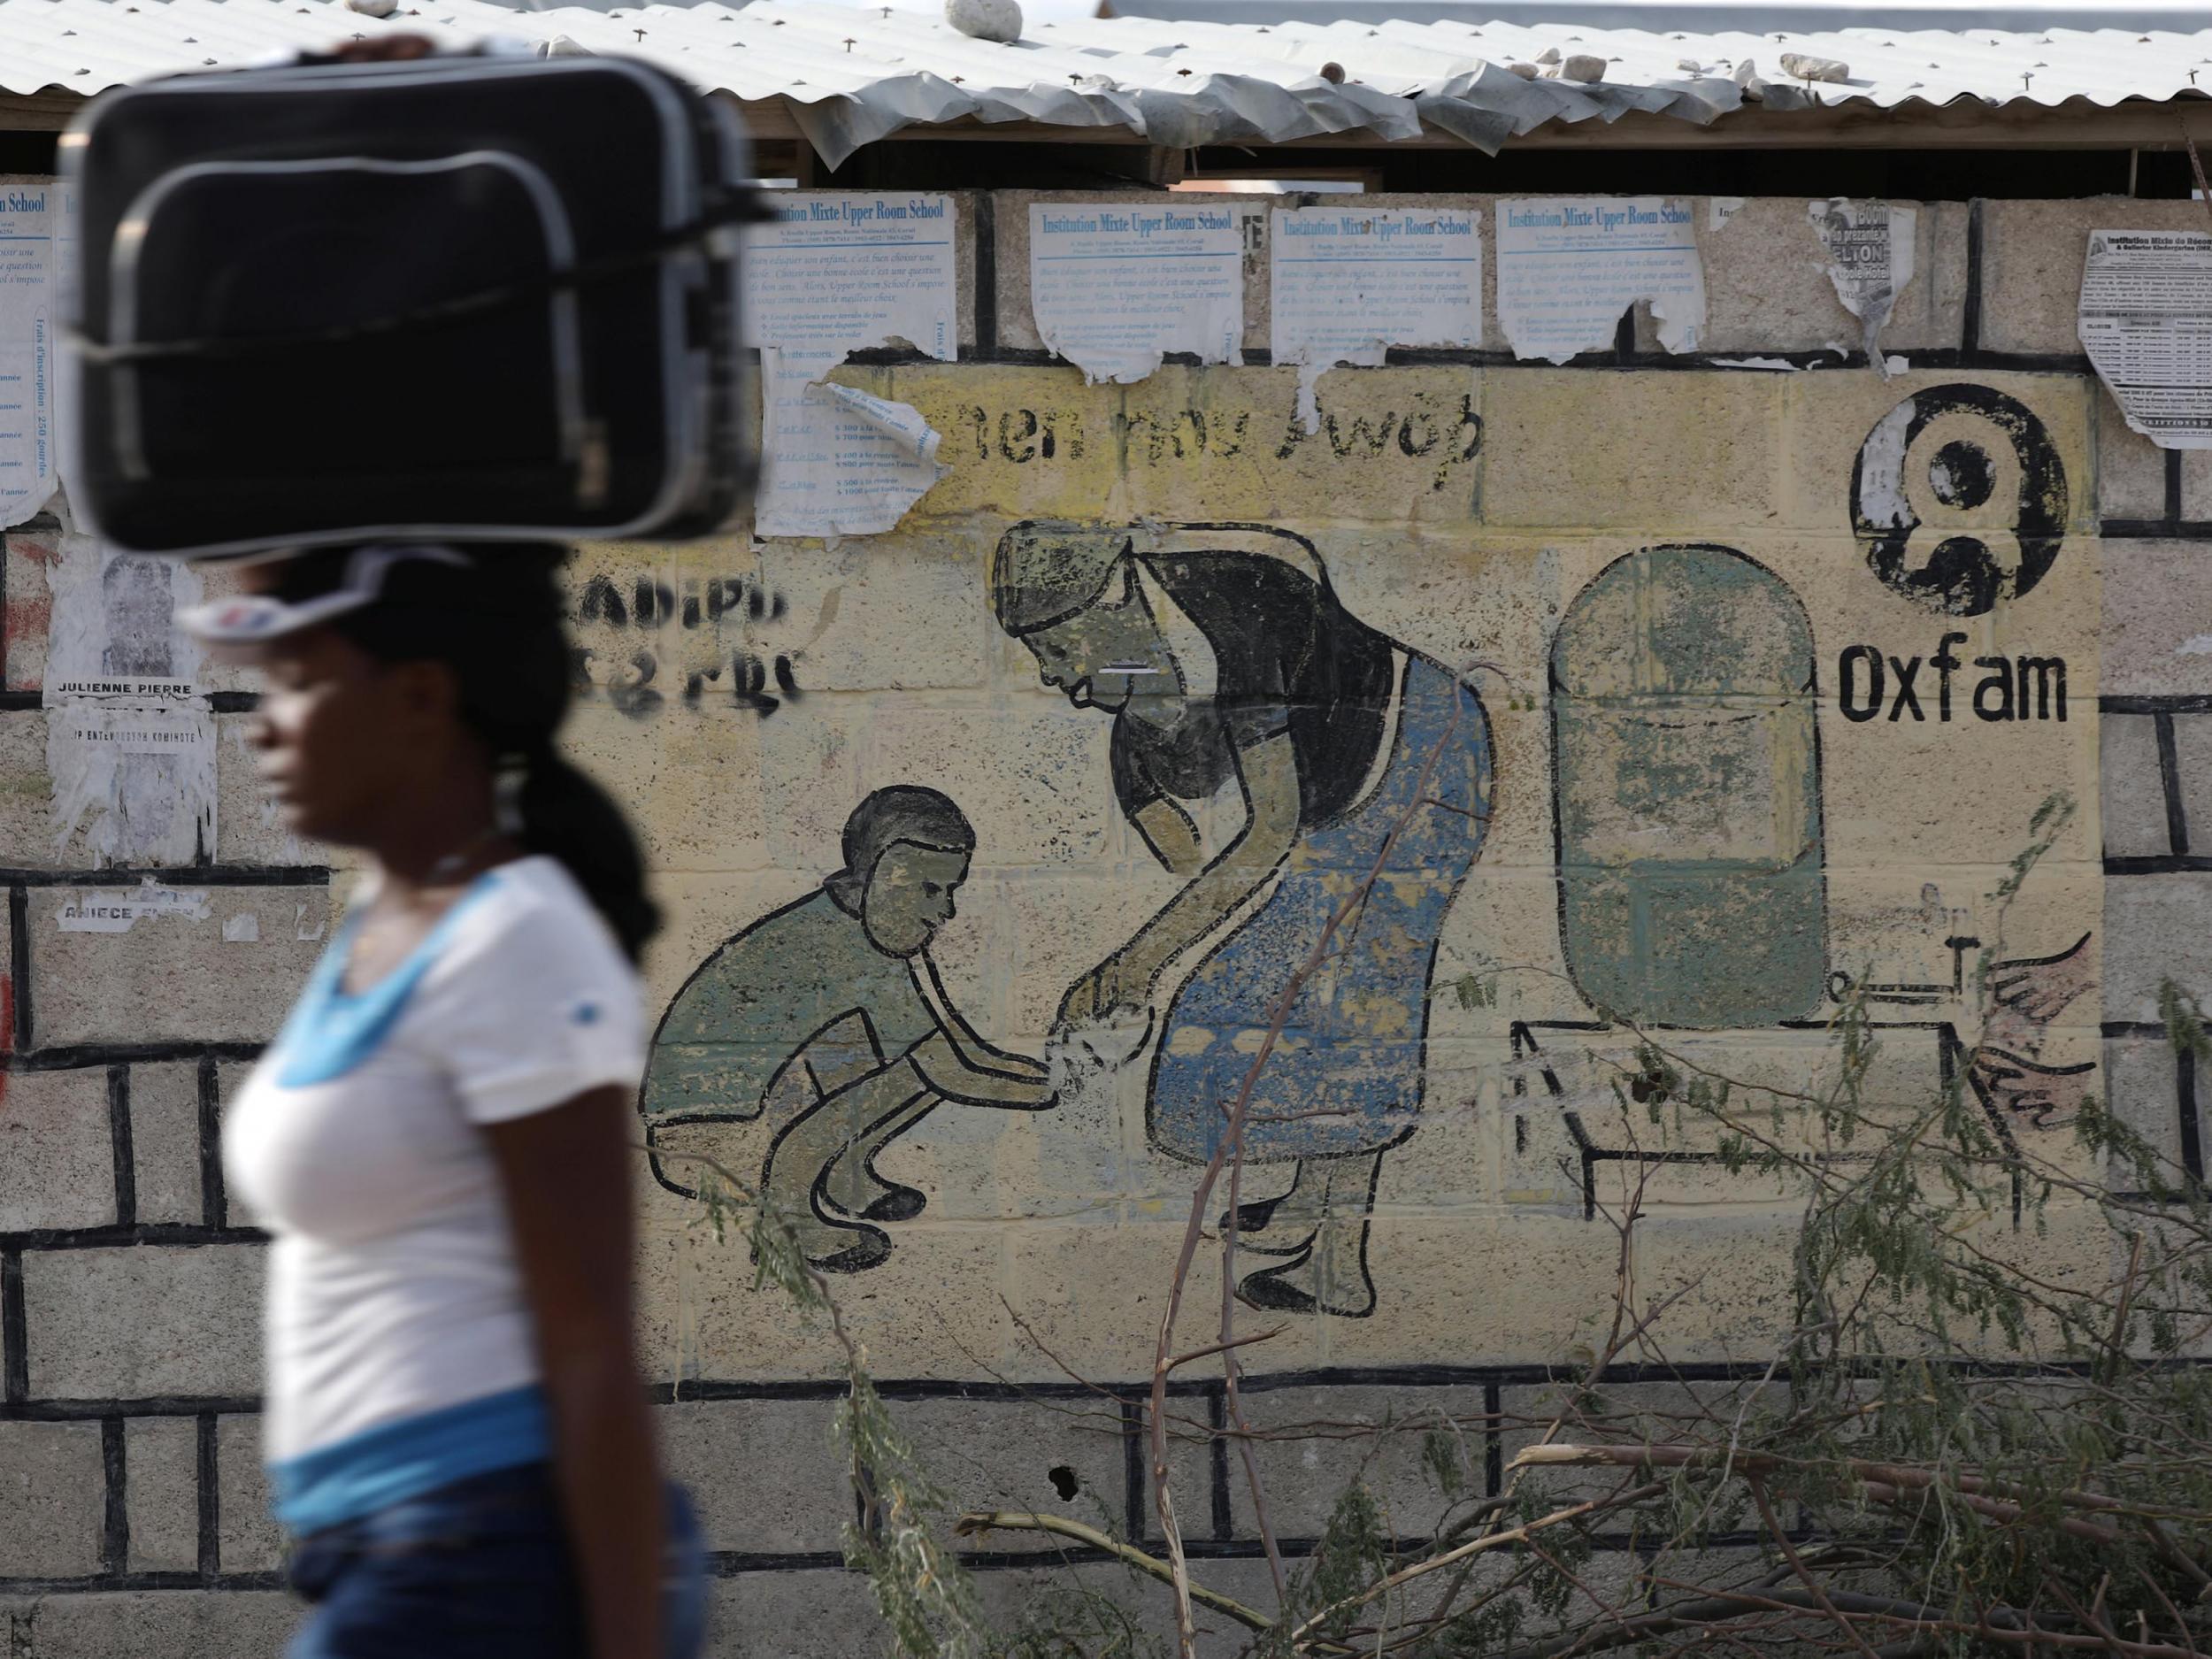 Abuse by Oxfam aid workers in Haiti was the ‘tip of the iceberg’, report finds